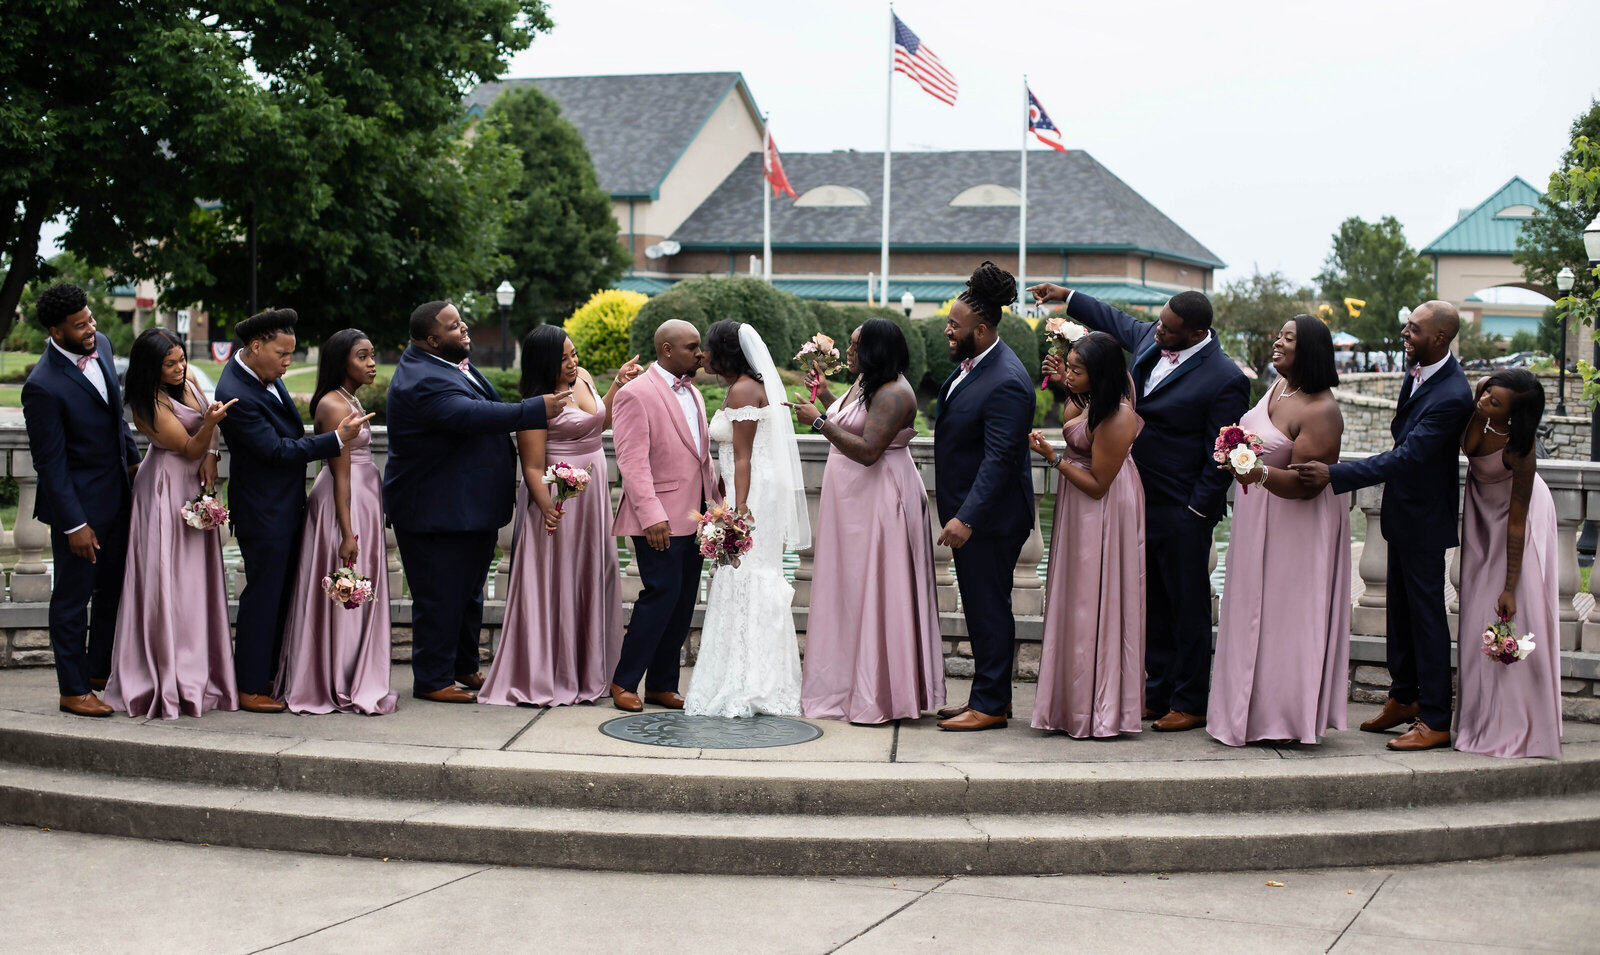 Bride-and-groom-with-bridal-party-groomsmen